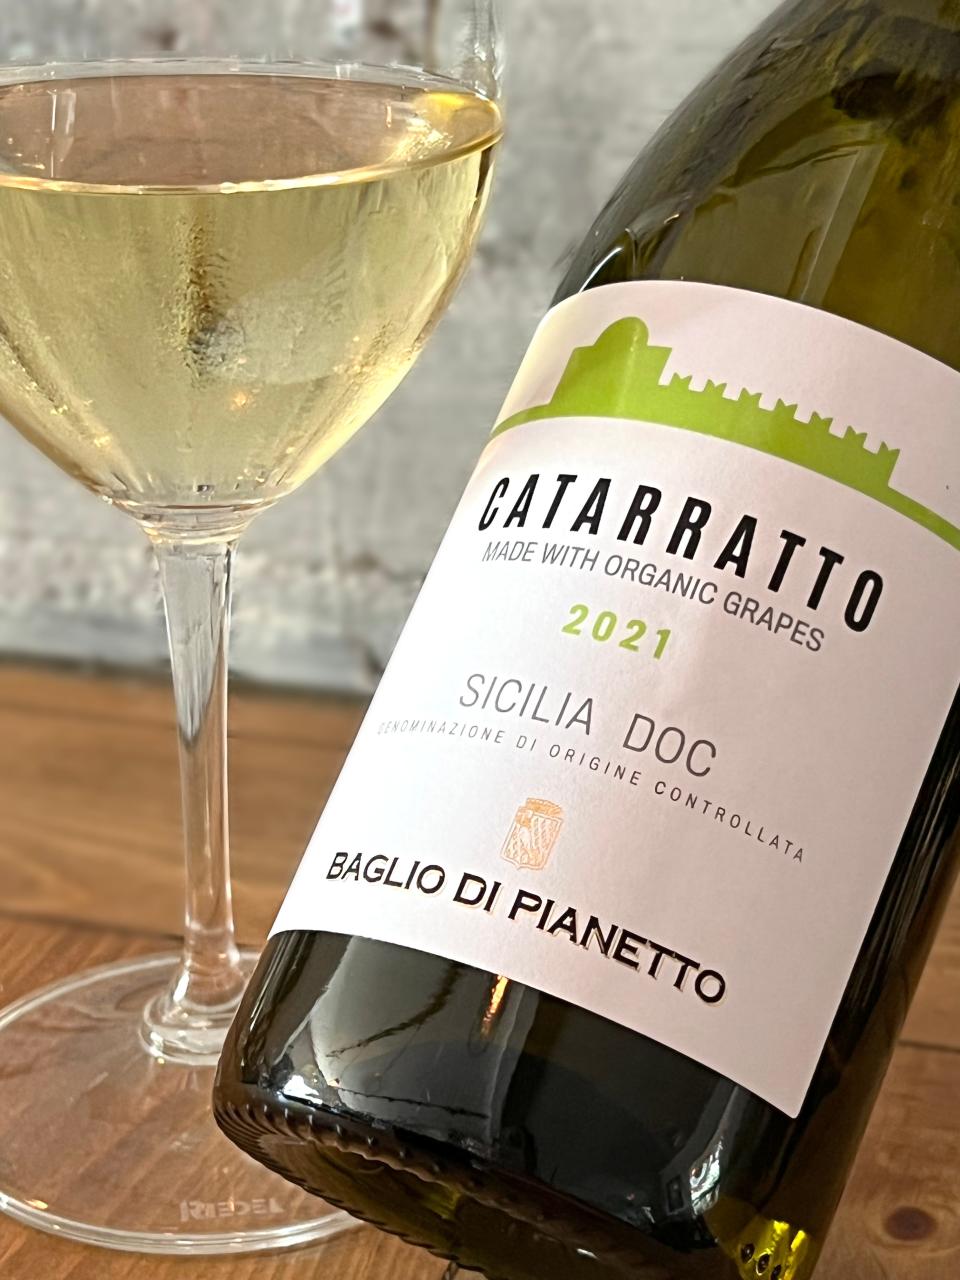 Cellar 59 in Stow pours an adventurous Sicilian white wine made from organic catarratto grapes for $10 per glass.